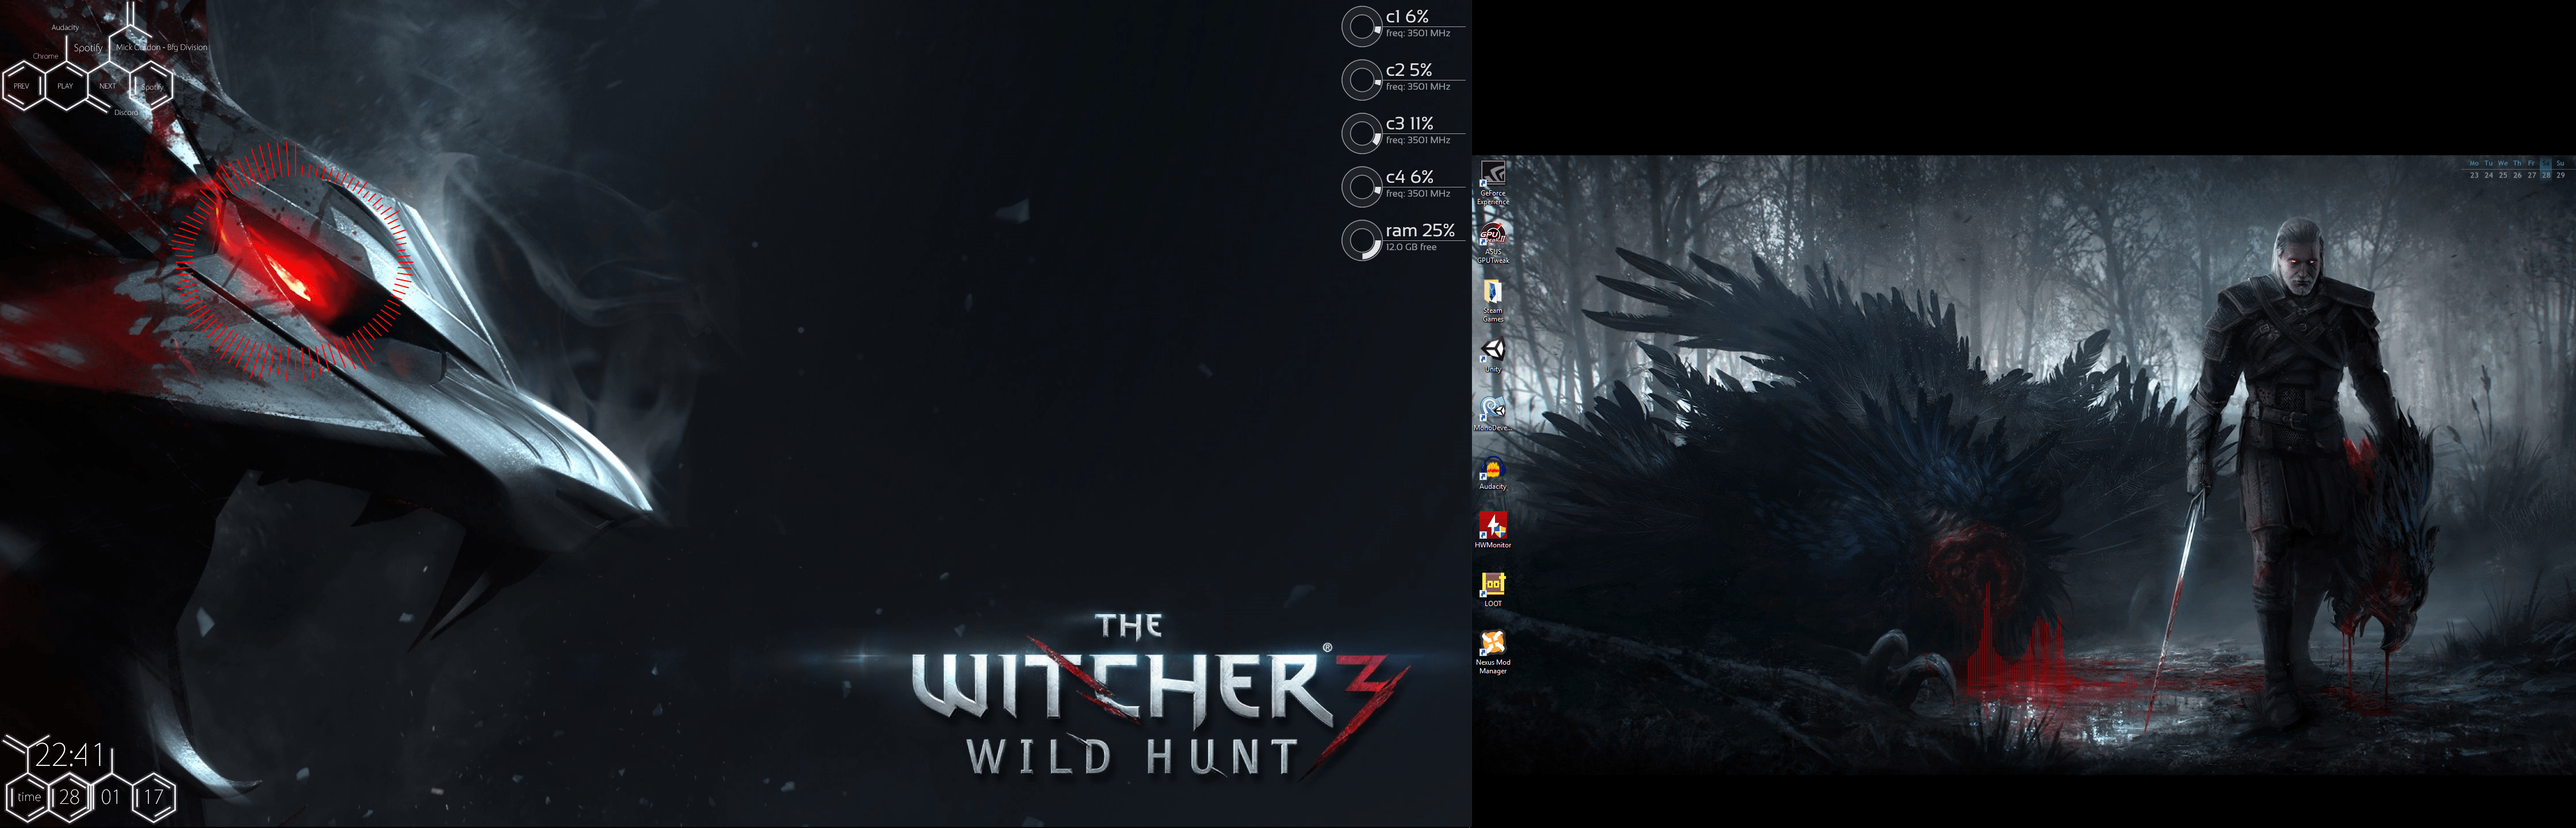 Witcher 3 Dual Monitor Wallpapers on WallpaperDog 4480x1440